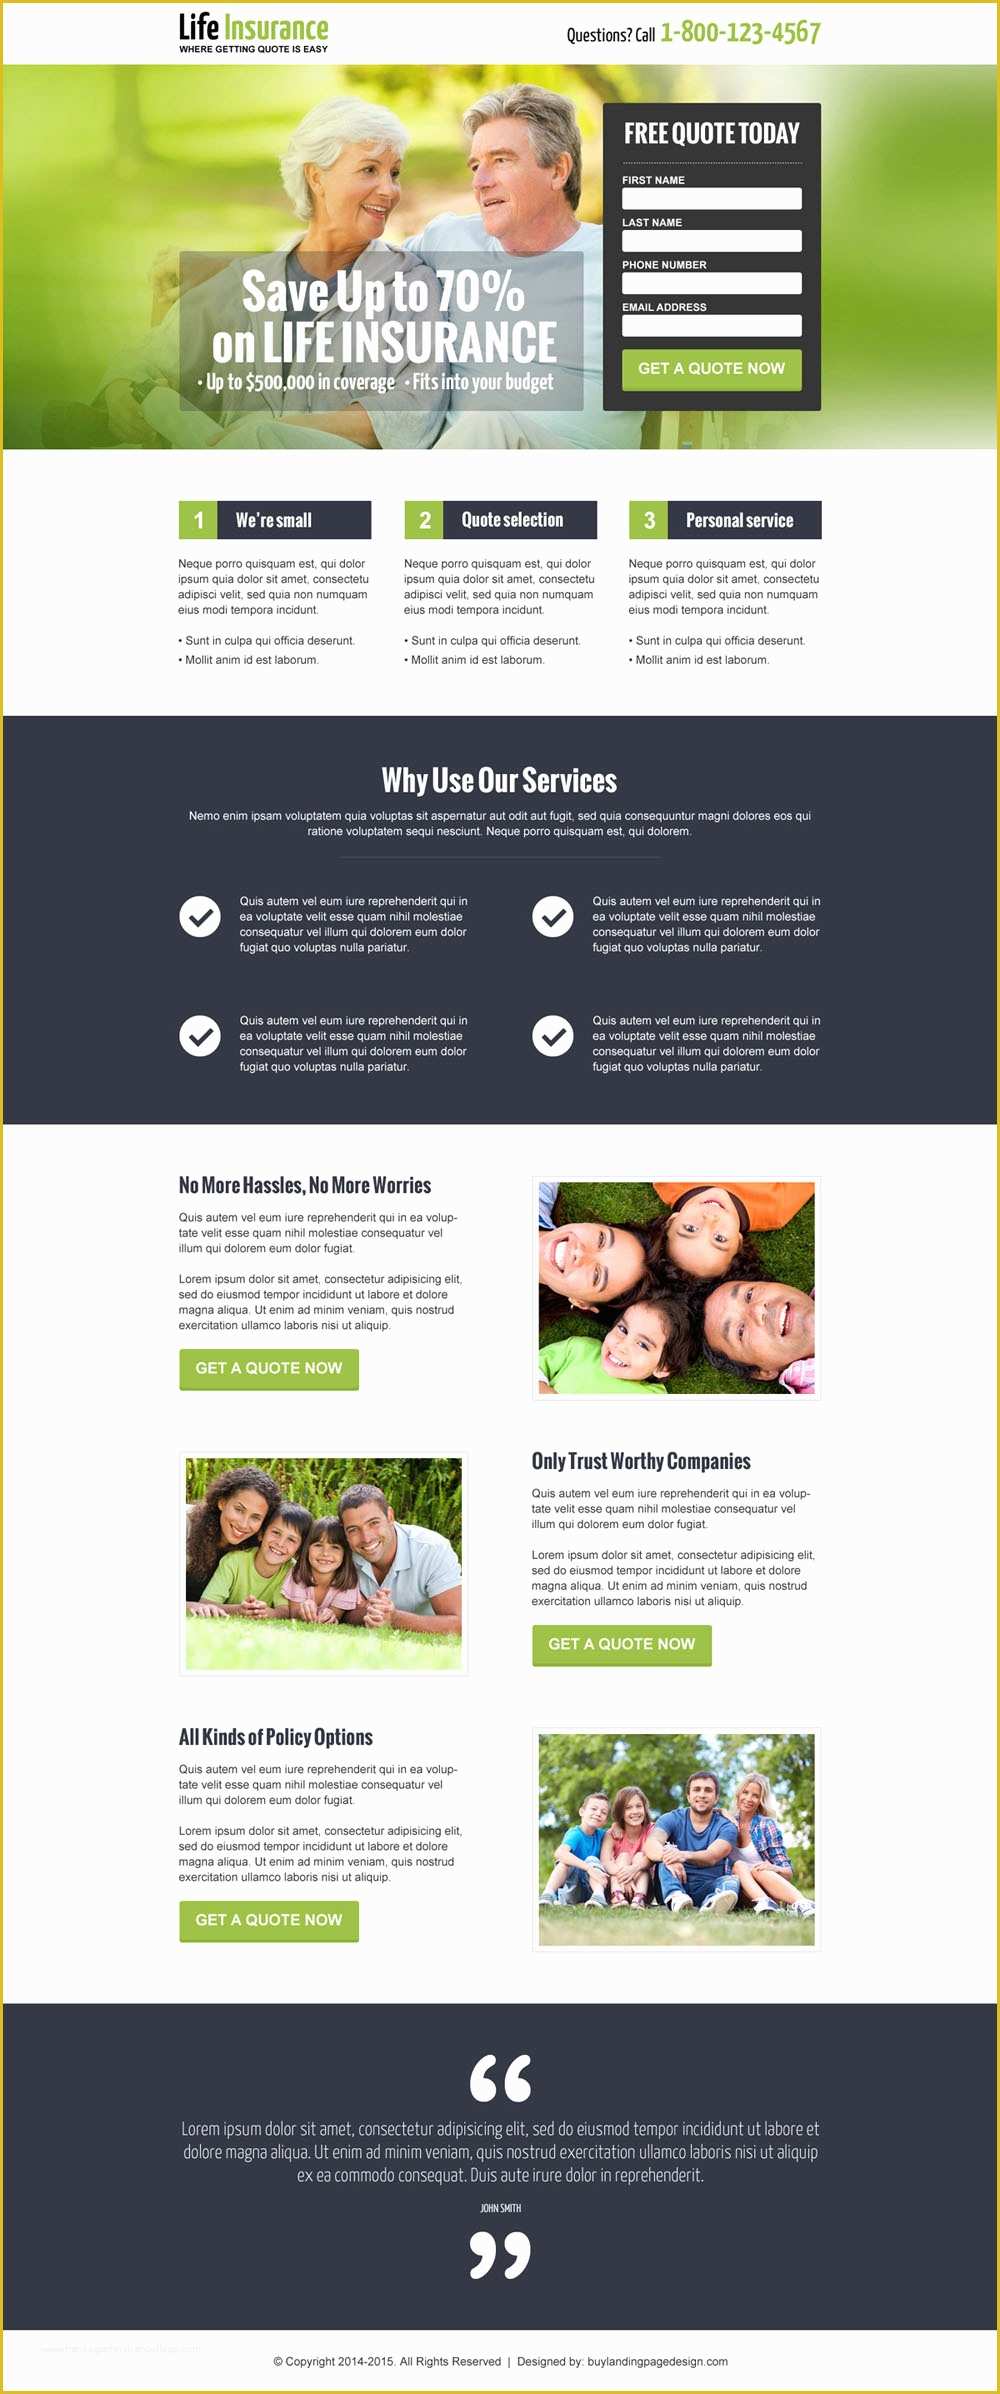 Free Lead Capture Page Templates Of Life Insurance Landing Pages to Boost Your Life Insurance